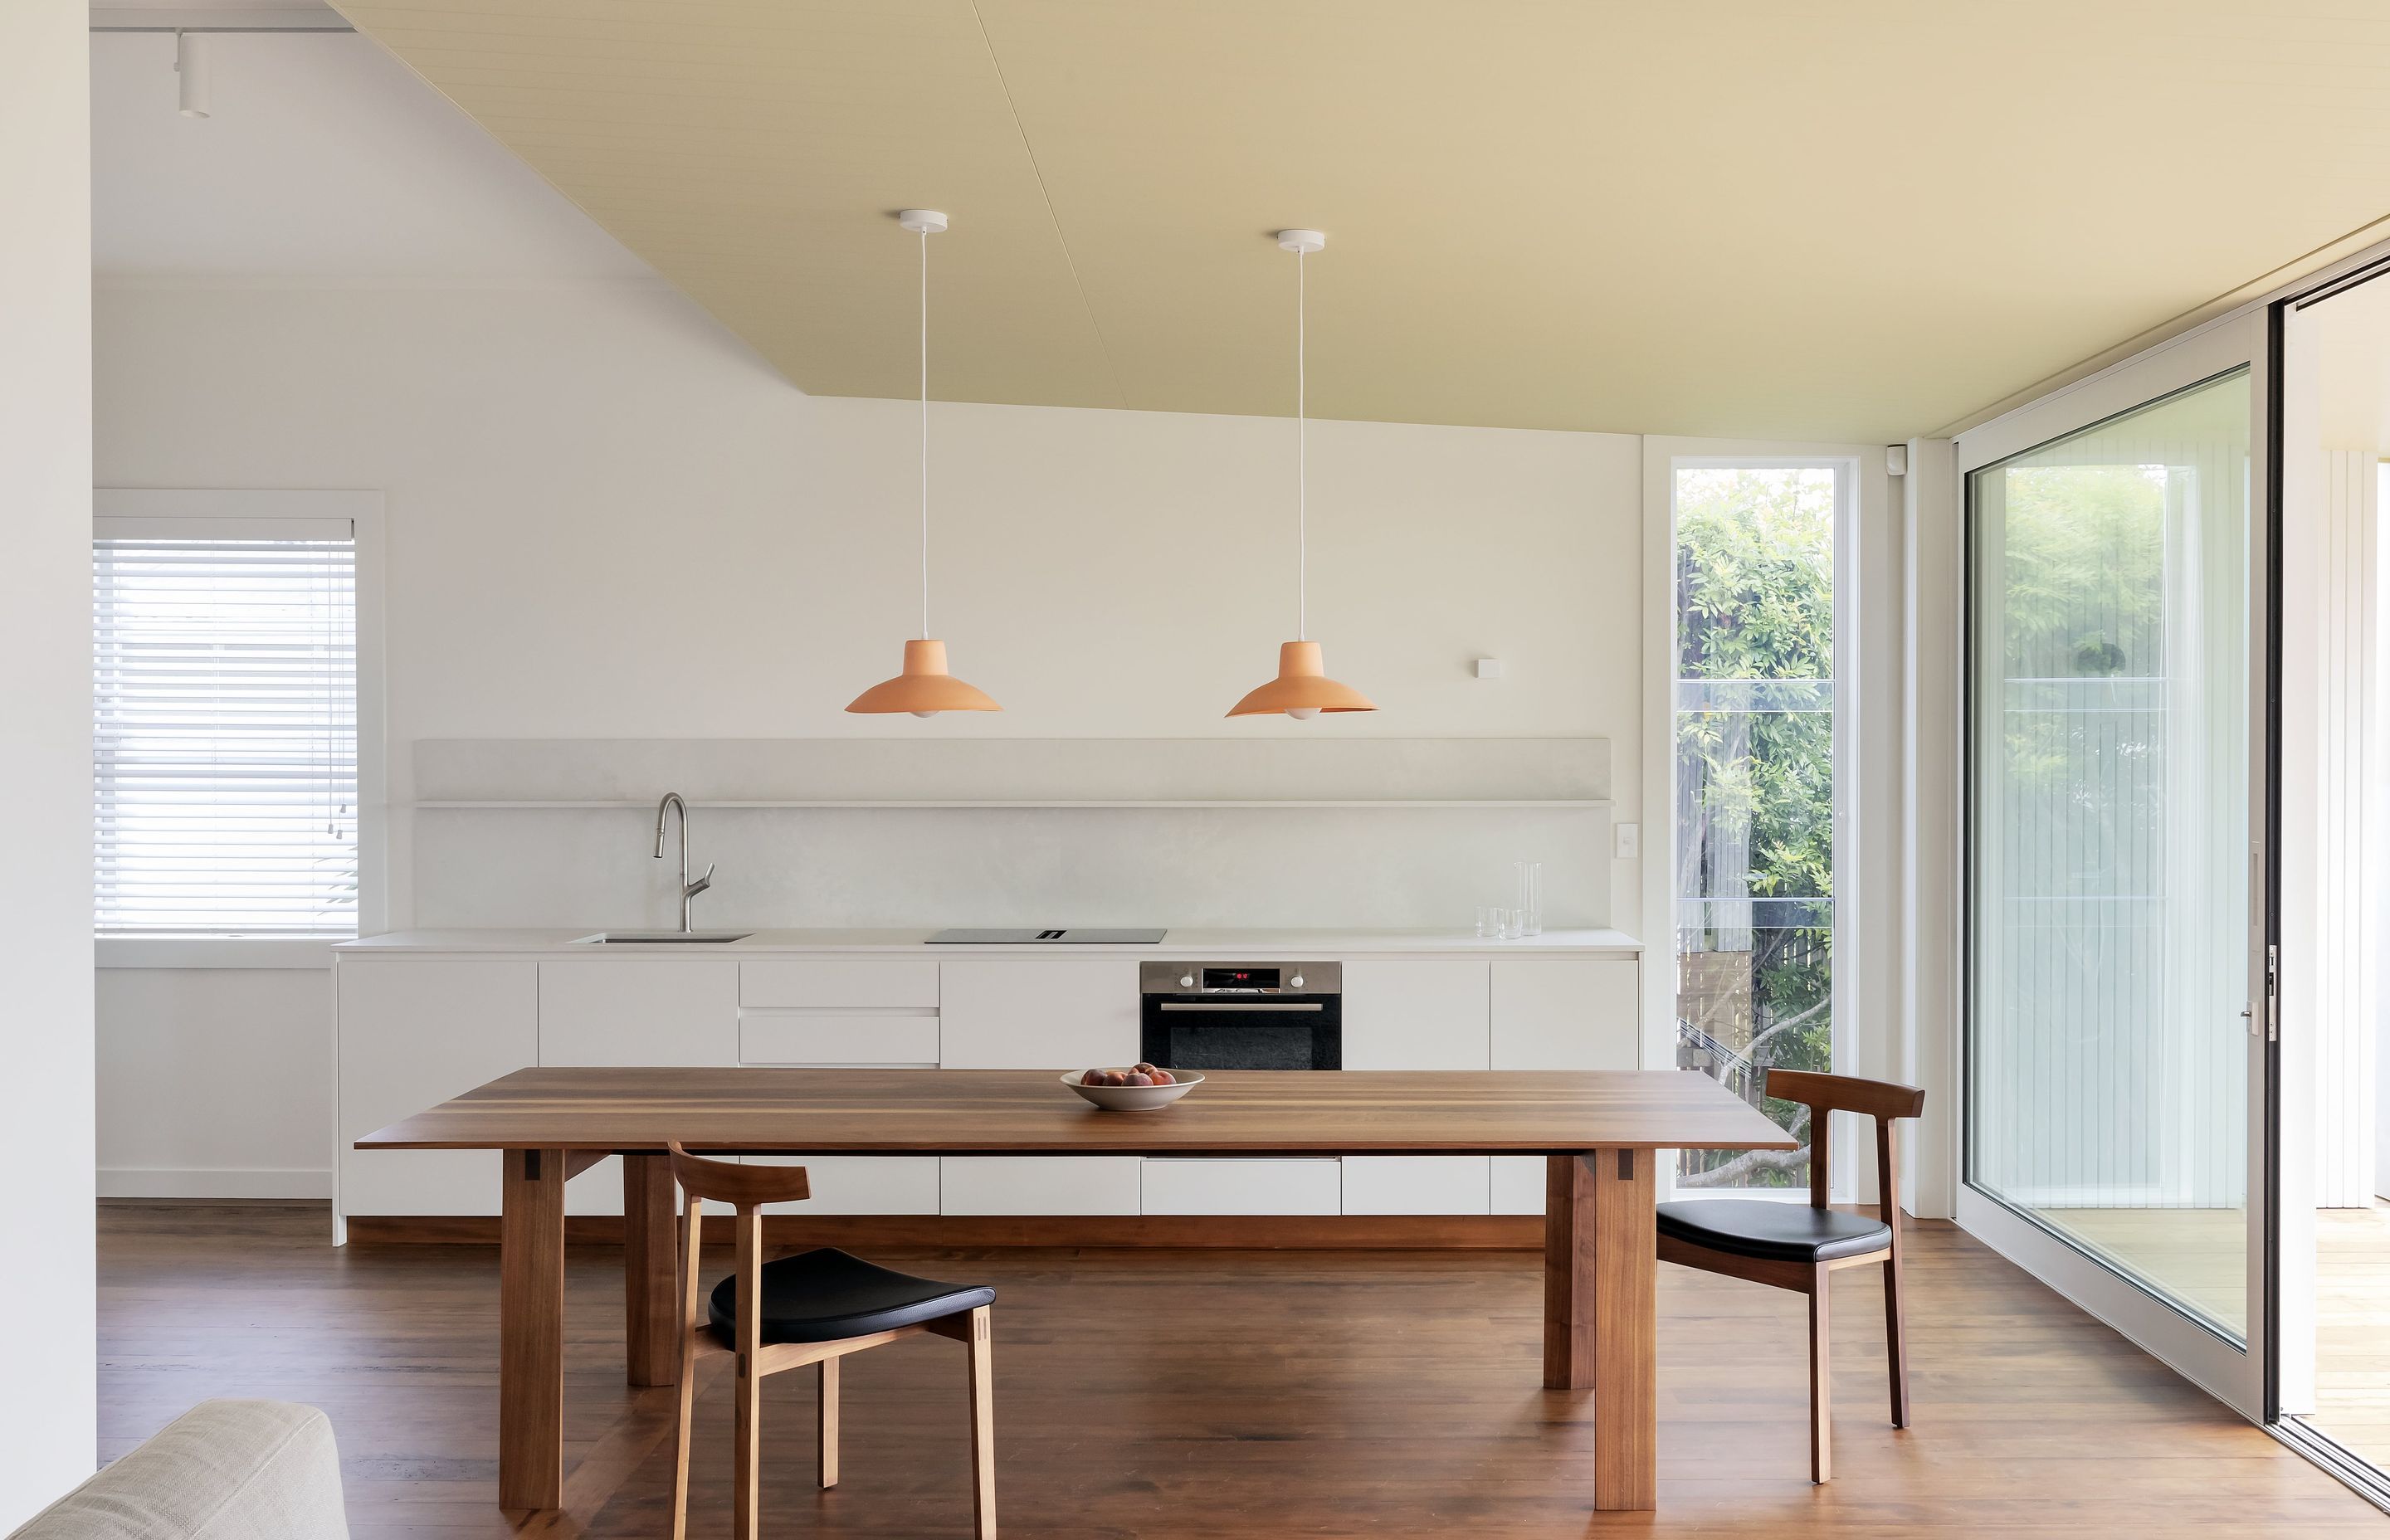 Natural light floods the minimalist kitchen and dining area through floor-to-ceiling glass sliding doors. Photo: David Straight